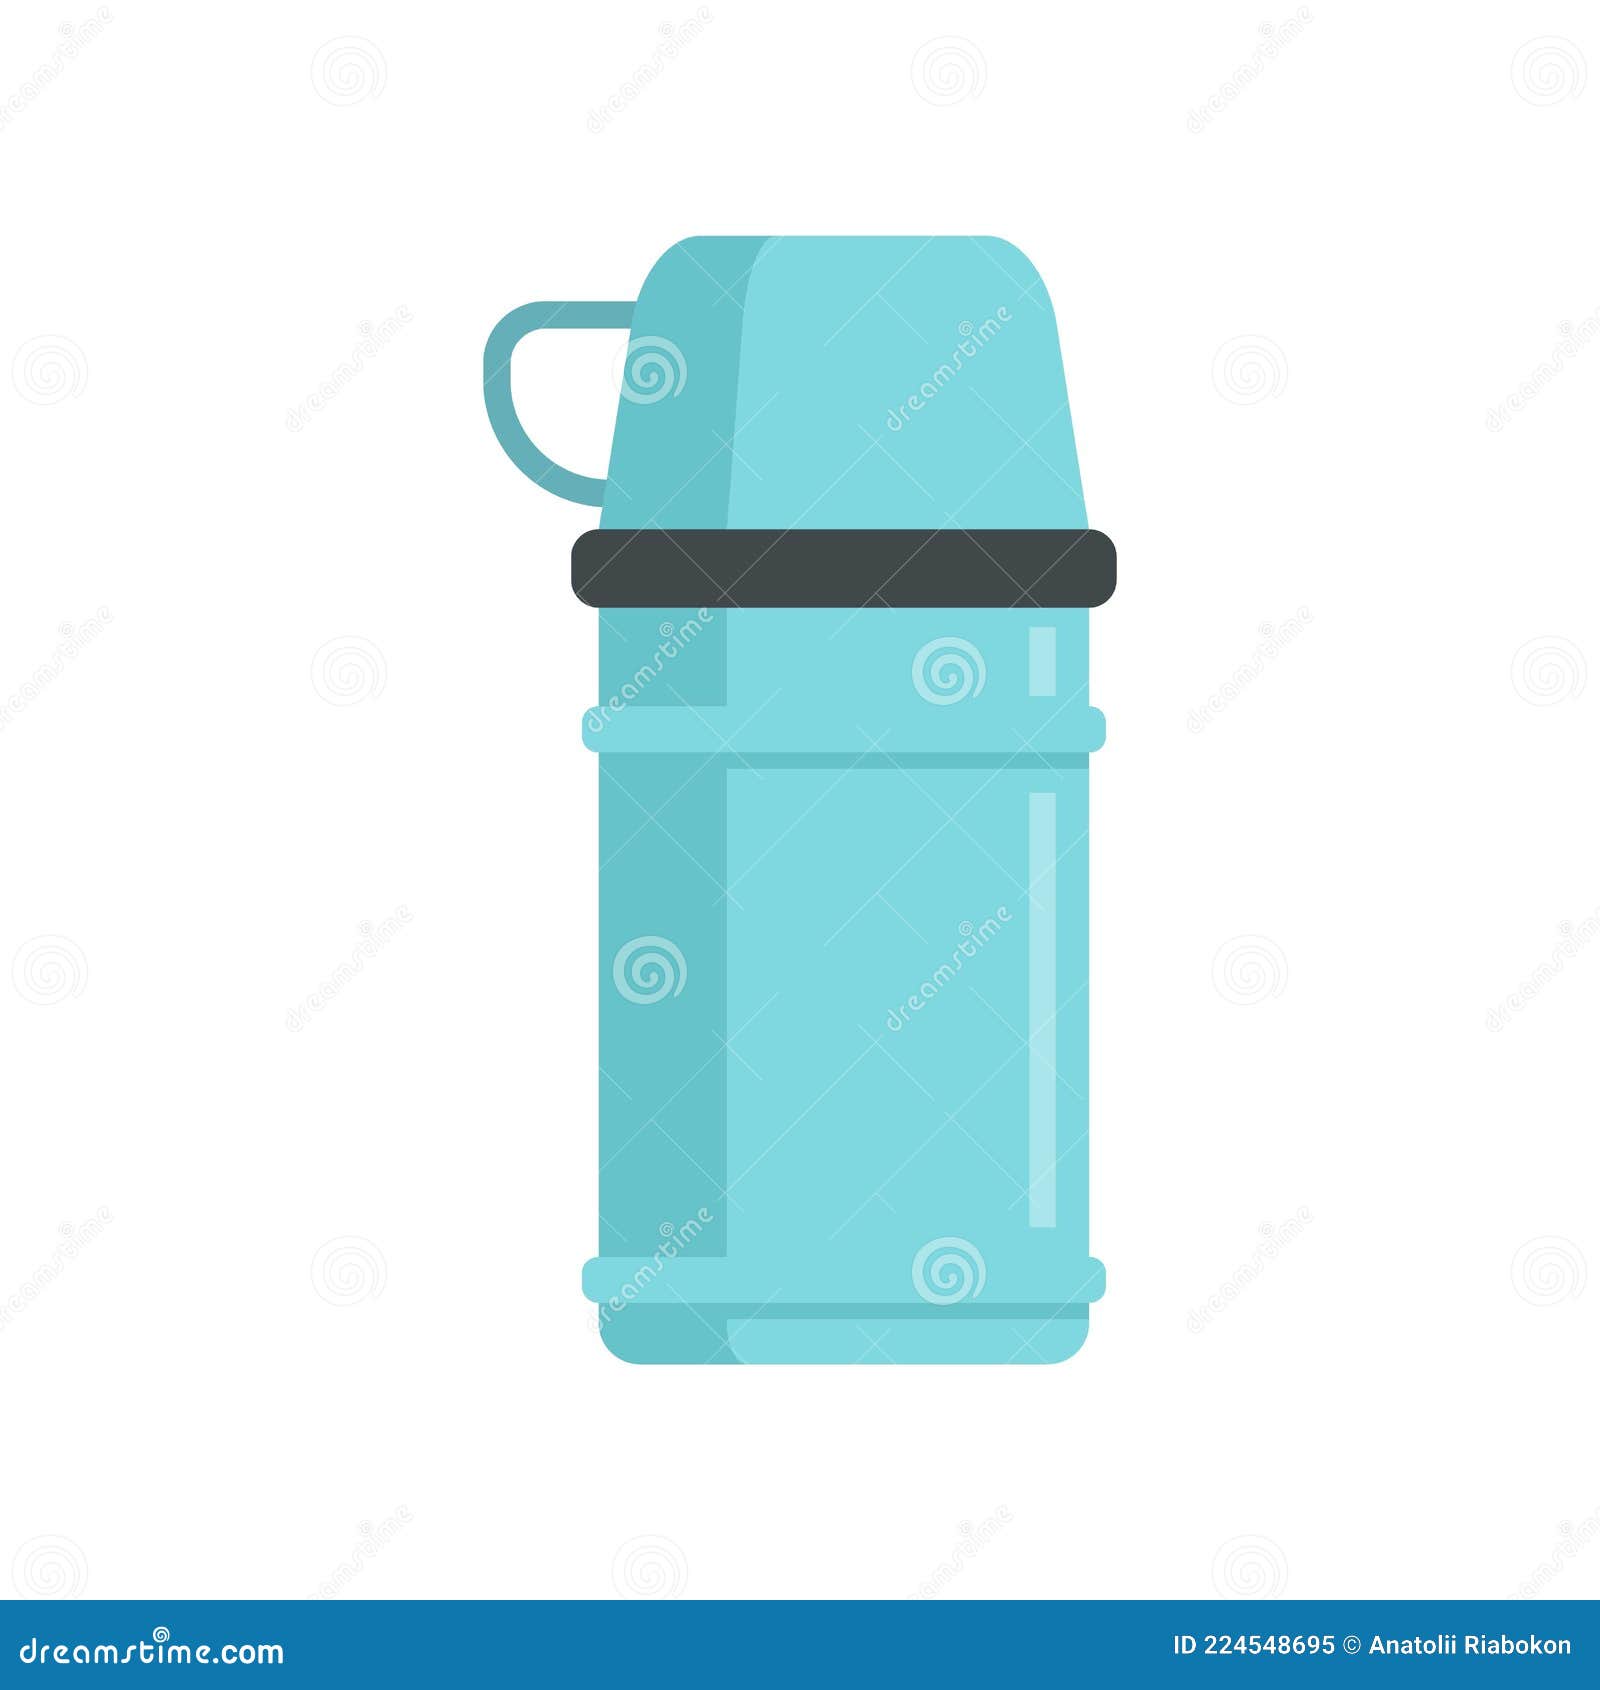 https://thumbs.dreamstime.com/z/vacuum-insulated-container-icon-flat-isolated-vector-illustration-white-background-224548695.jpg